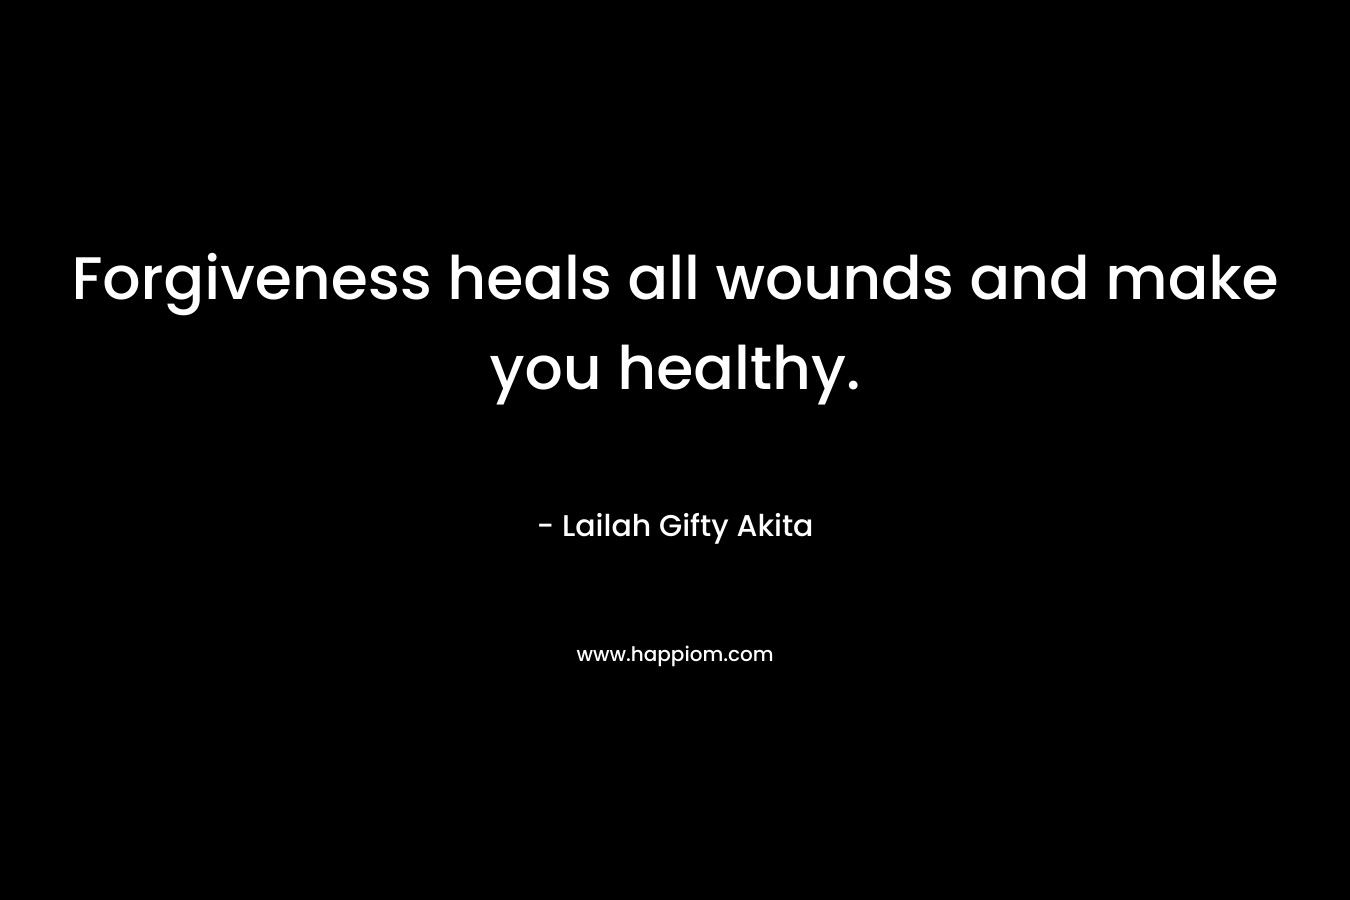 Forgiveness heals all wounds and make you healthy.